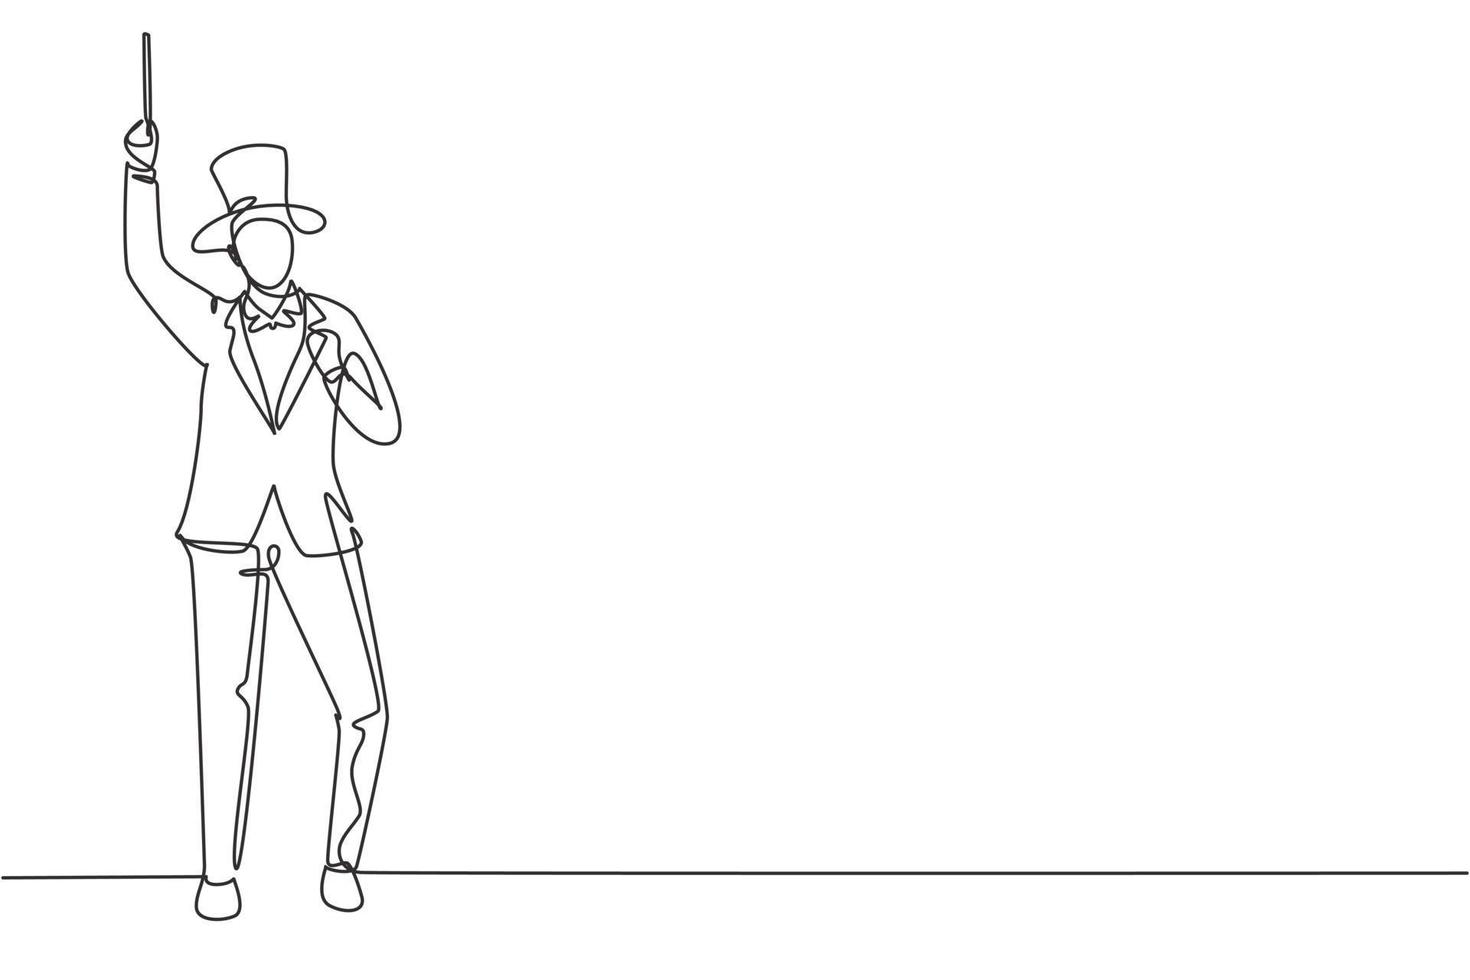 Continuous one line drawing magician stands with celebrate gesture wearing hat and holding magic wand performing tricks at circus show. Success job. Single line draw design vector graphic illustration